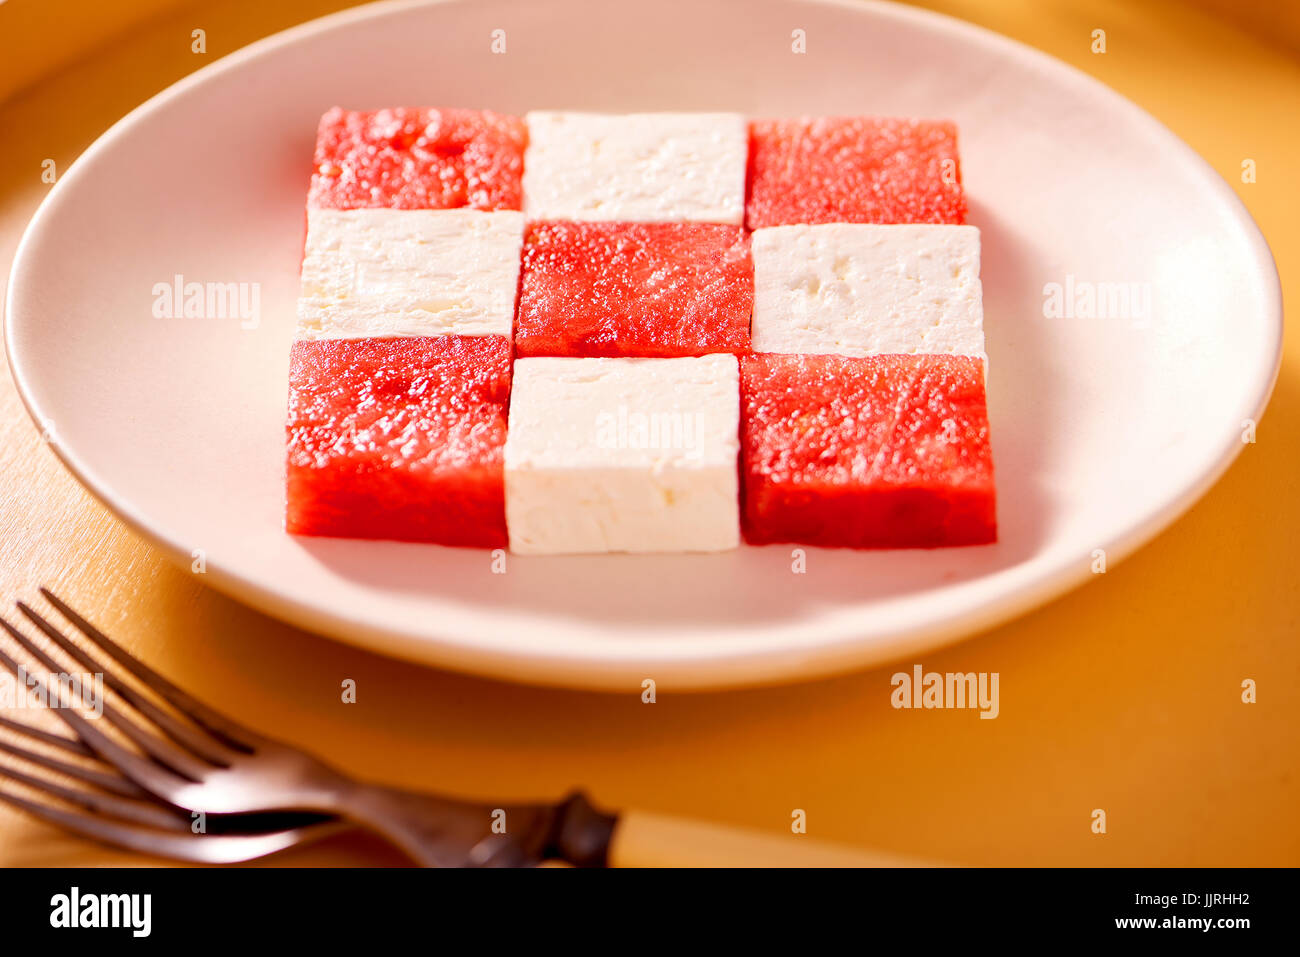 Cubes of watermelon and feta cheese on a plate forming a square pattern. Stock Photo